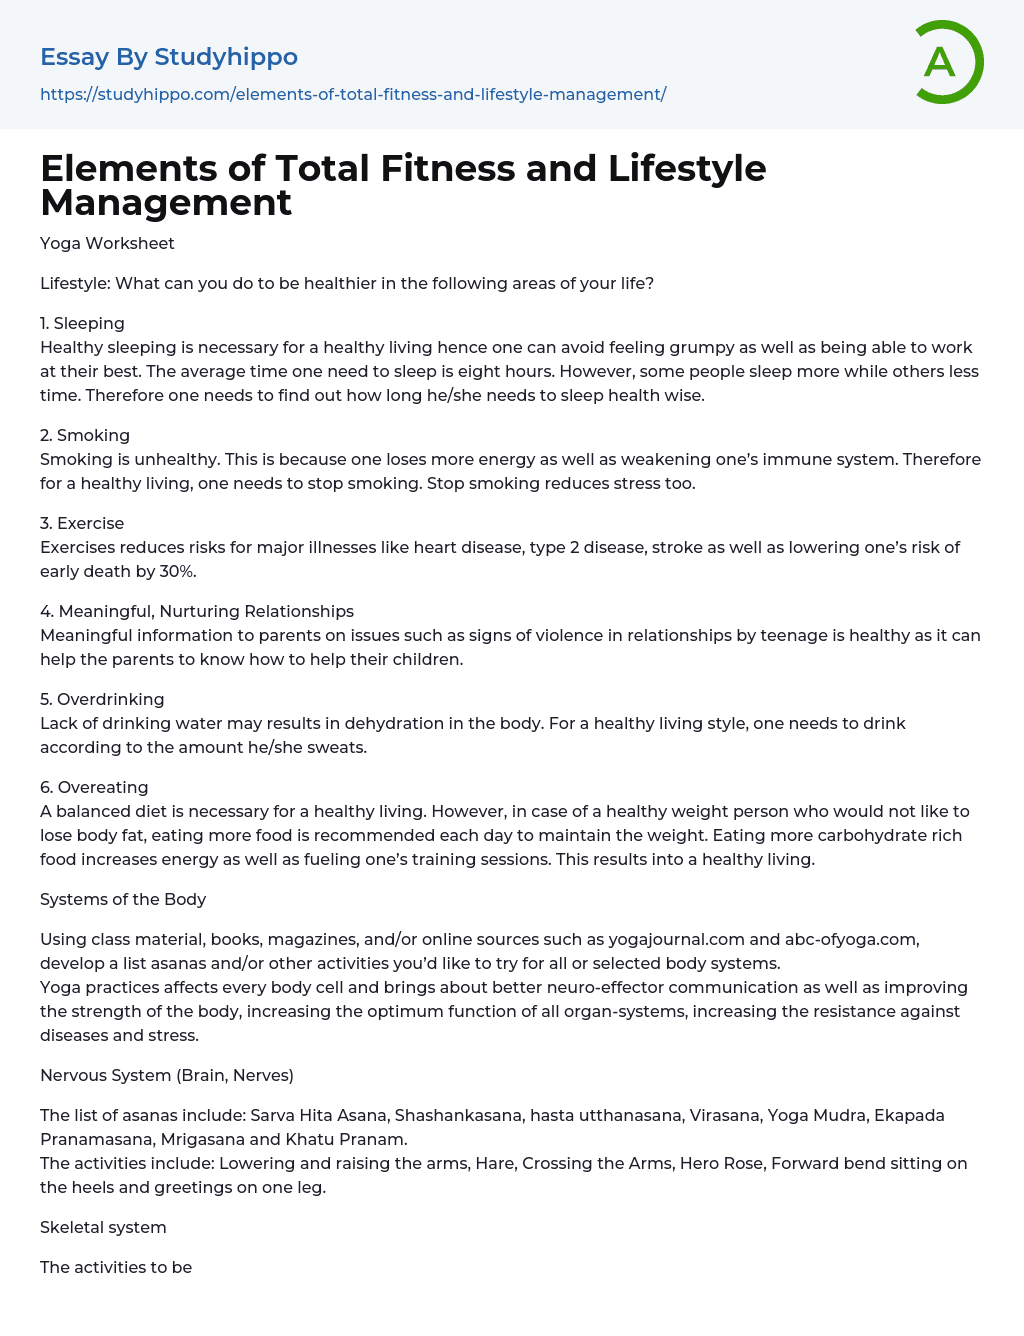 Elements of Total Fitness and Lifestyle Management Essay Example